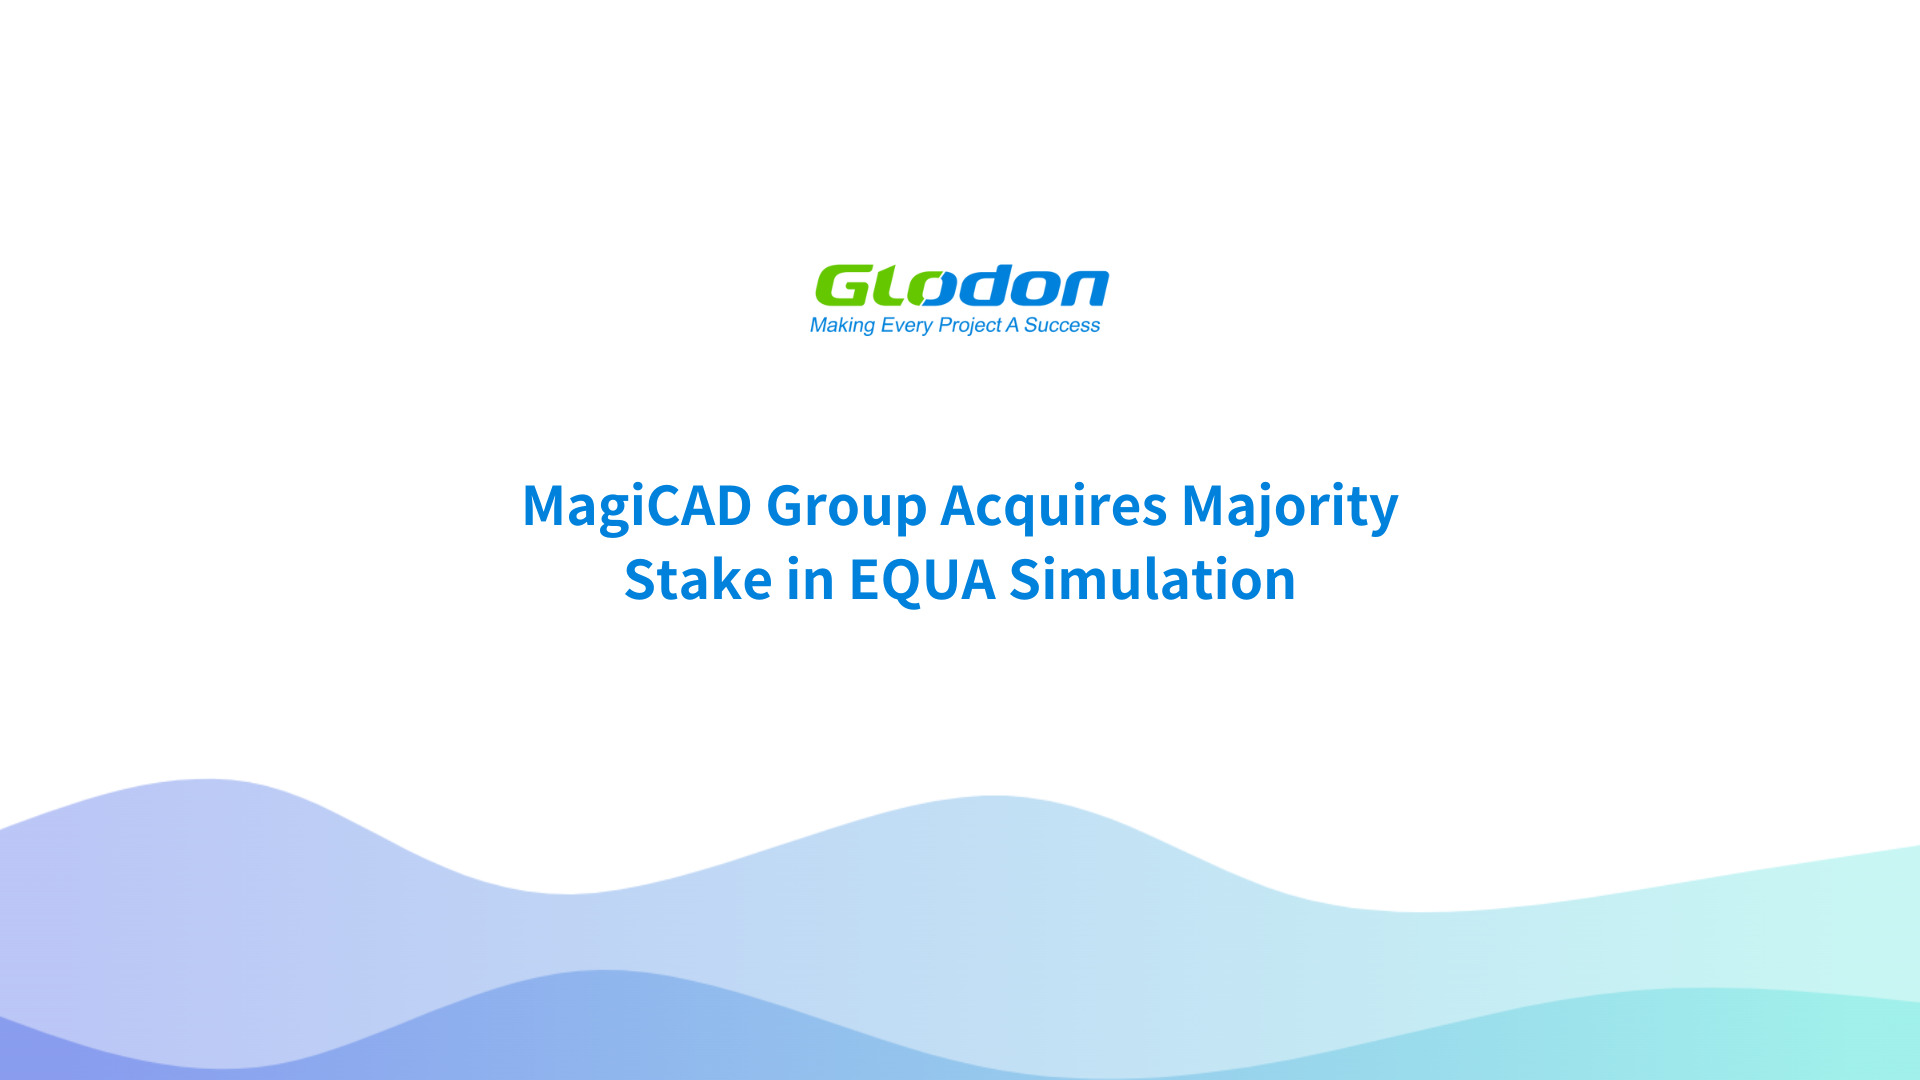 MagiCAD Group Acquires Majority Stake In EQUA Simulation - Companies Join Forces To Drive Sustainability In Building Services Design